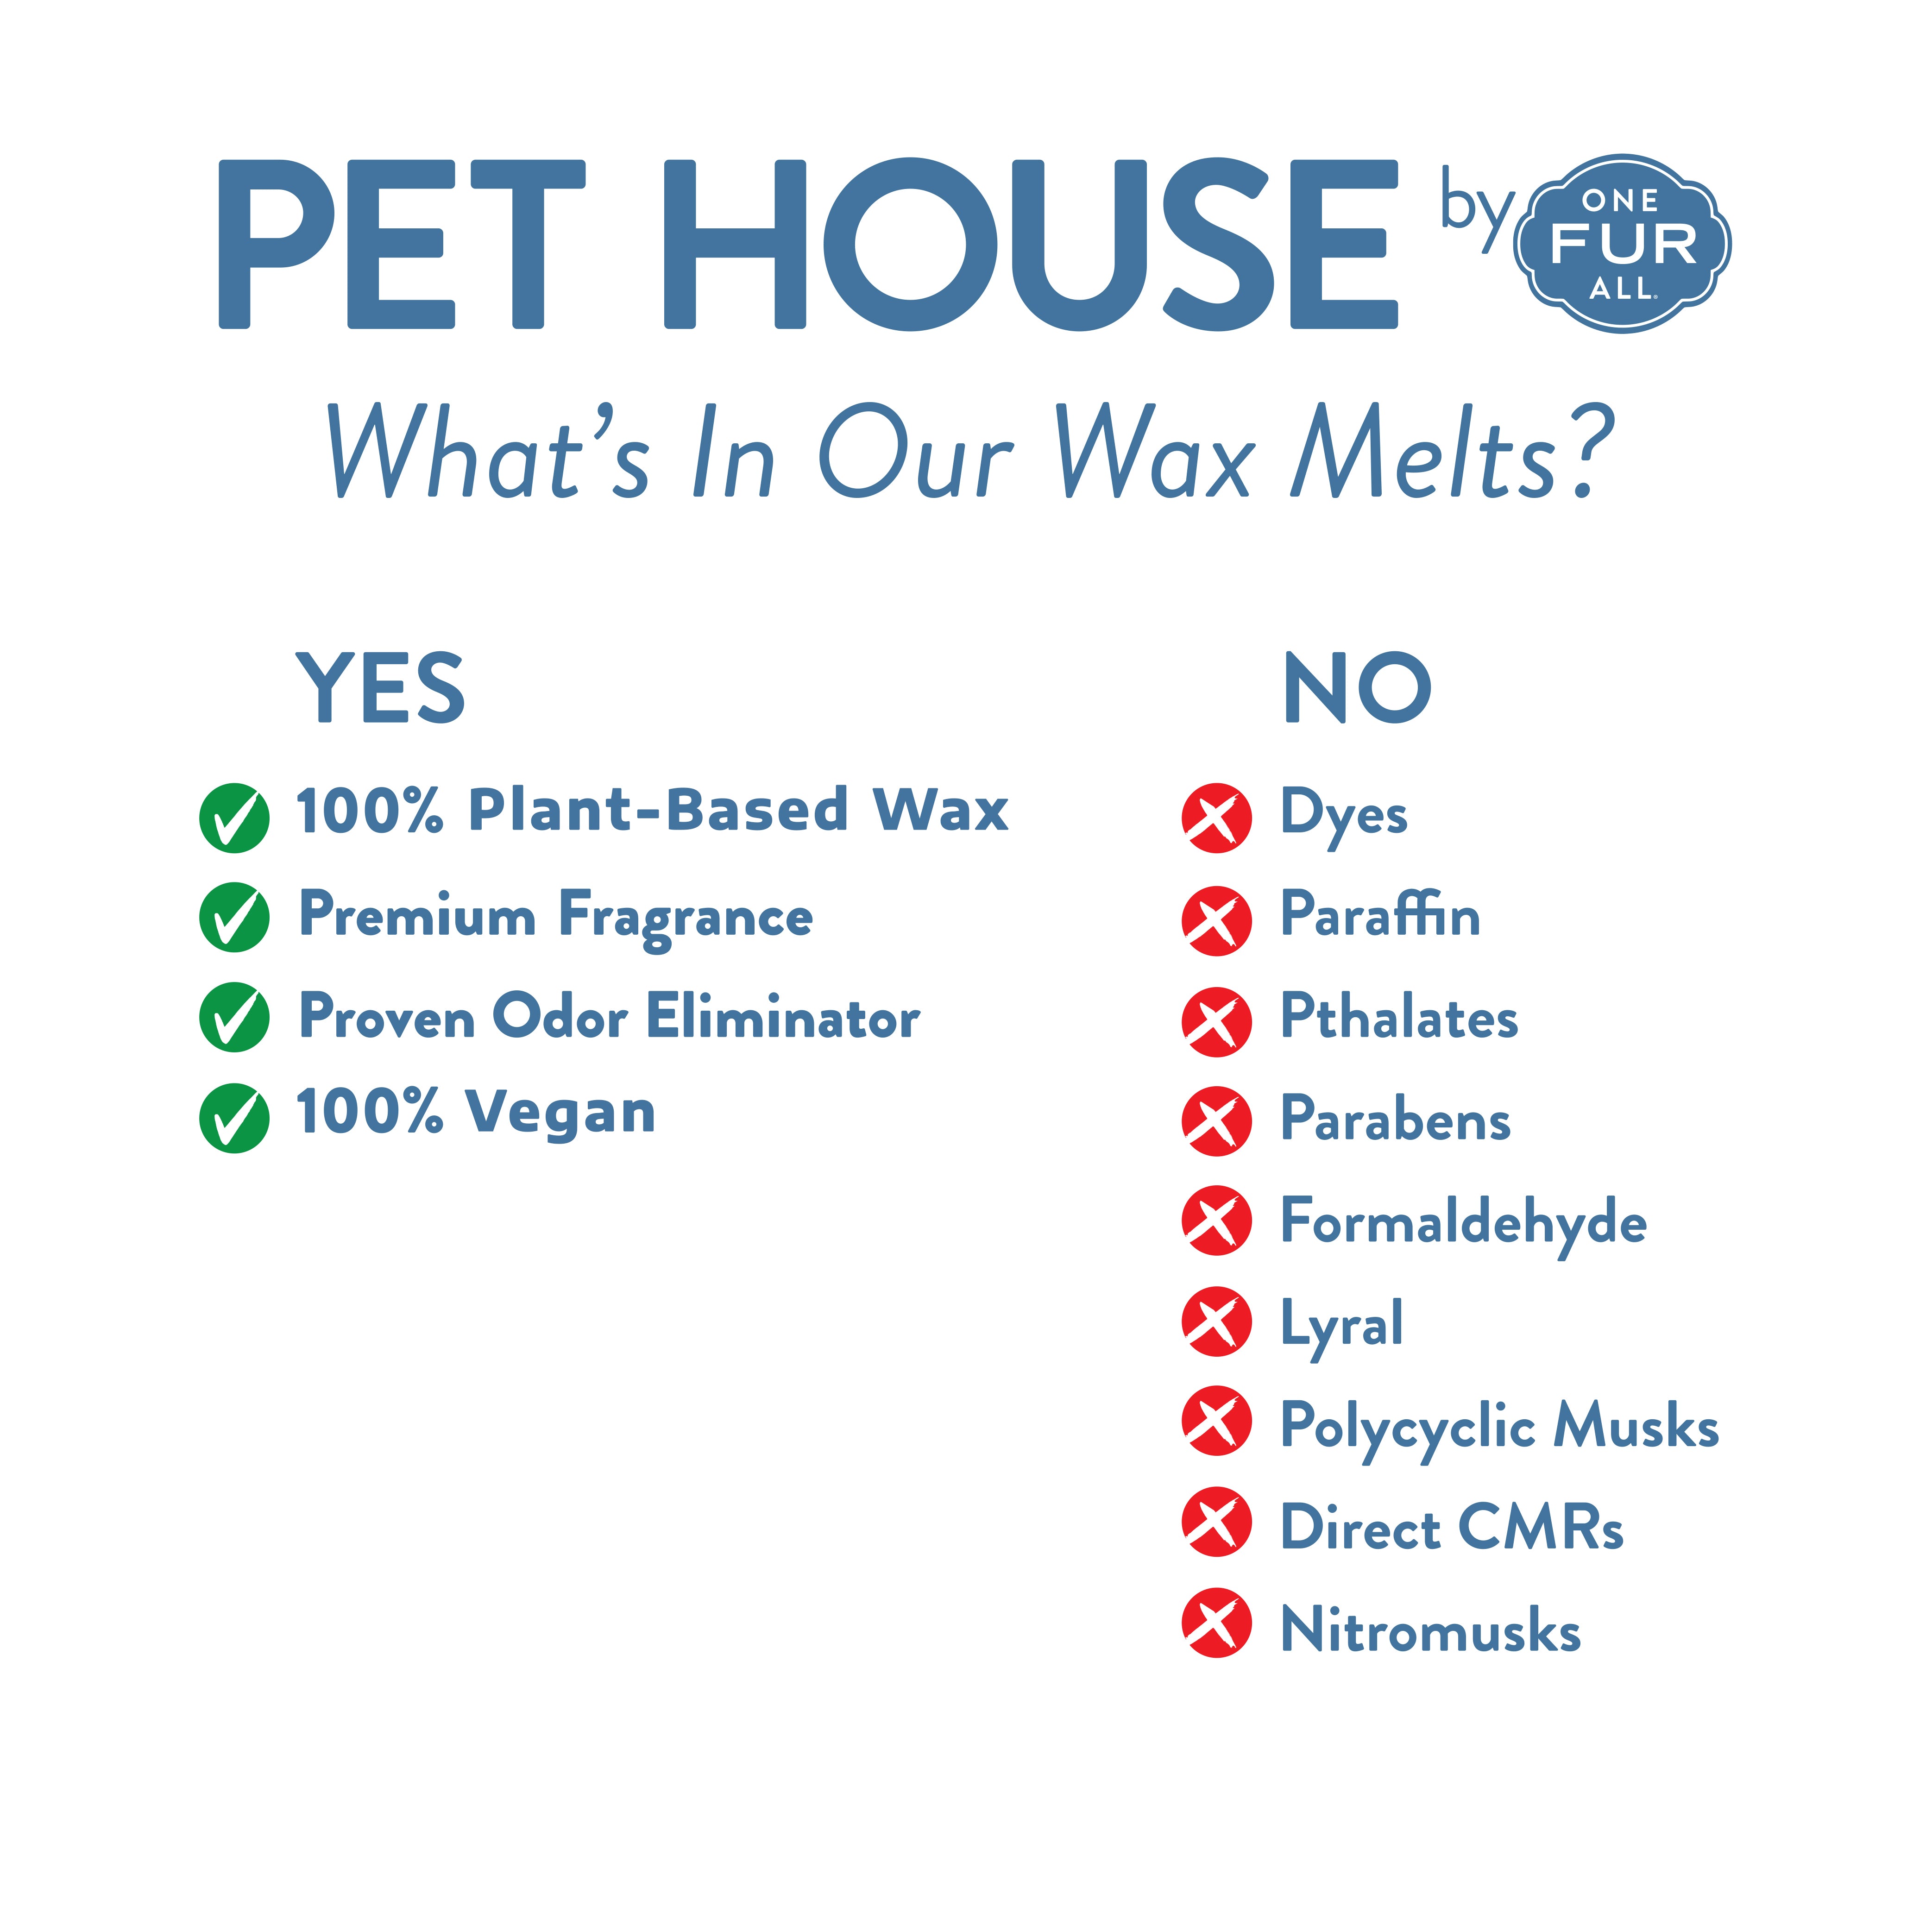 What's in our Wax Melts